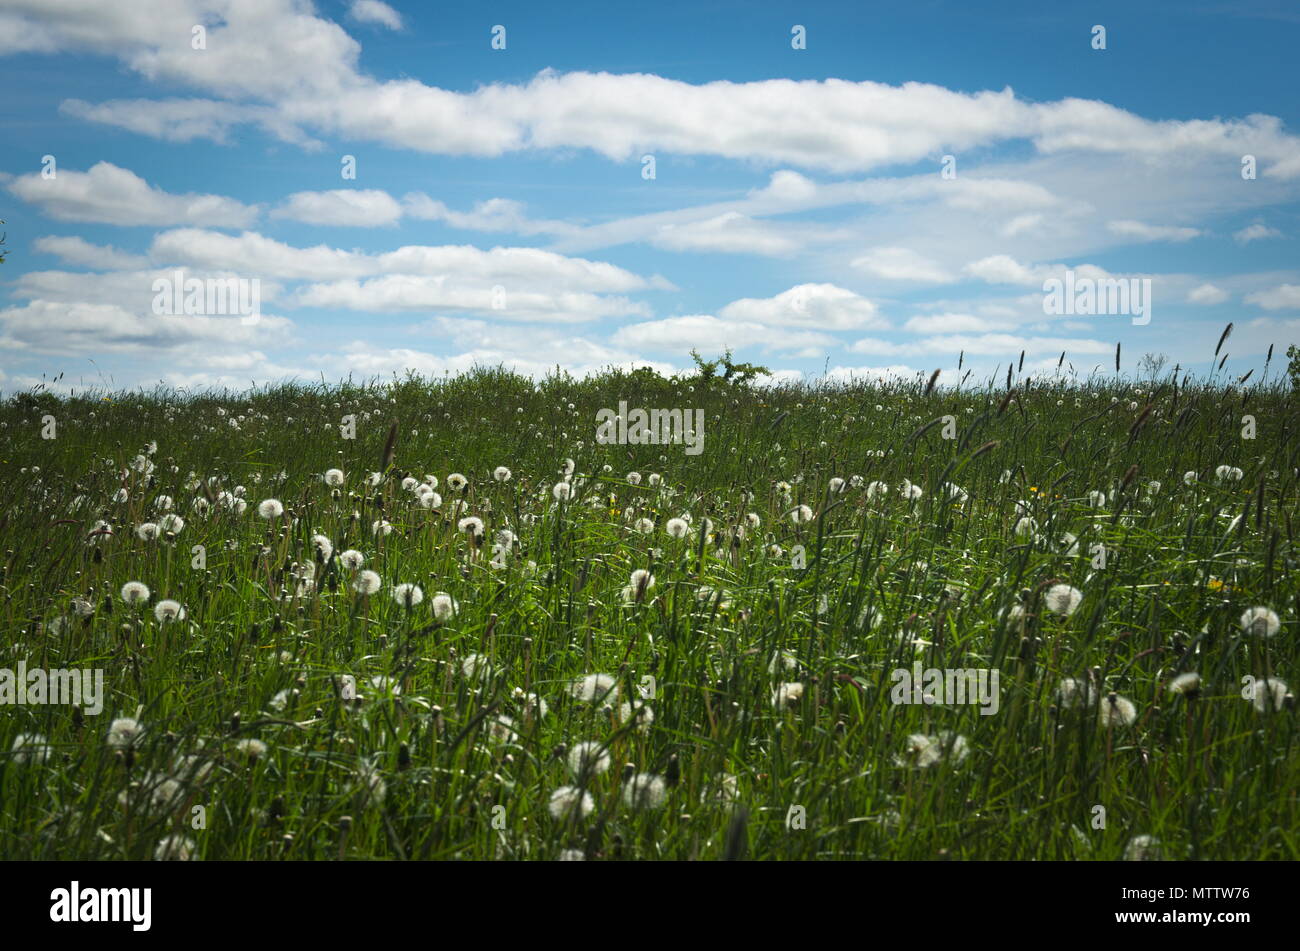 A field of Dandelions gone to seed Stock Photo